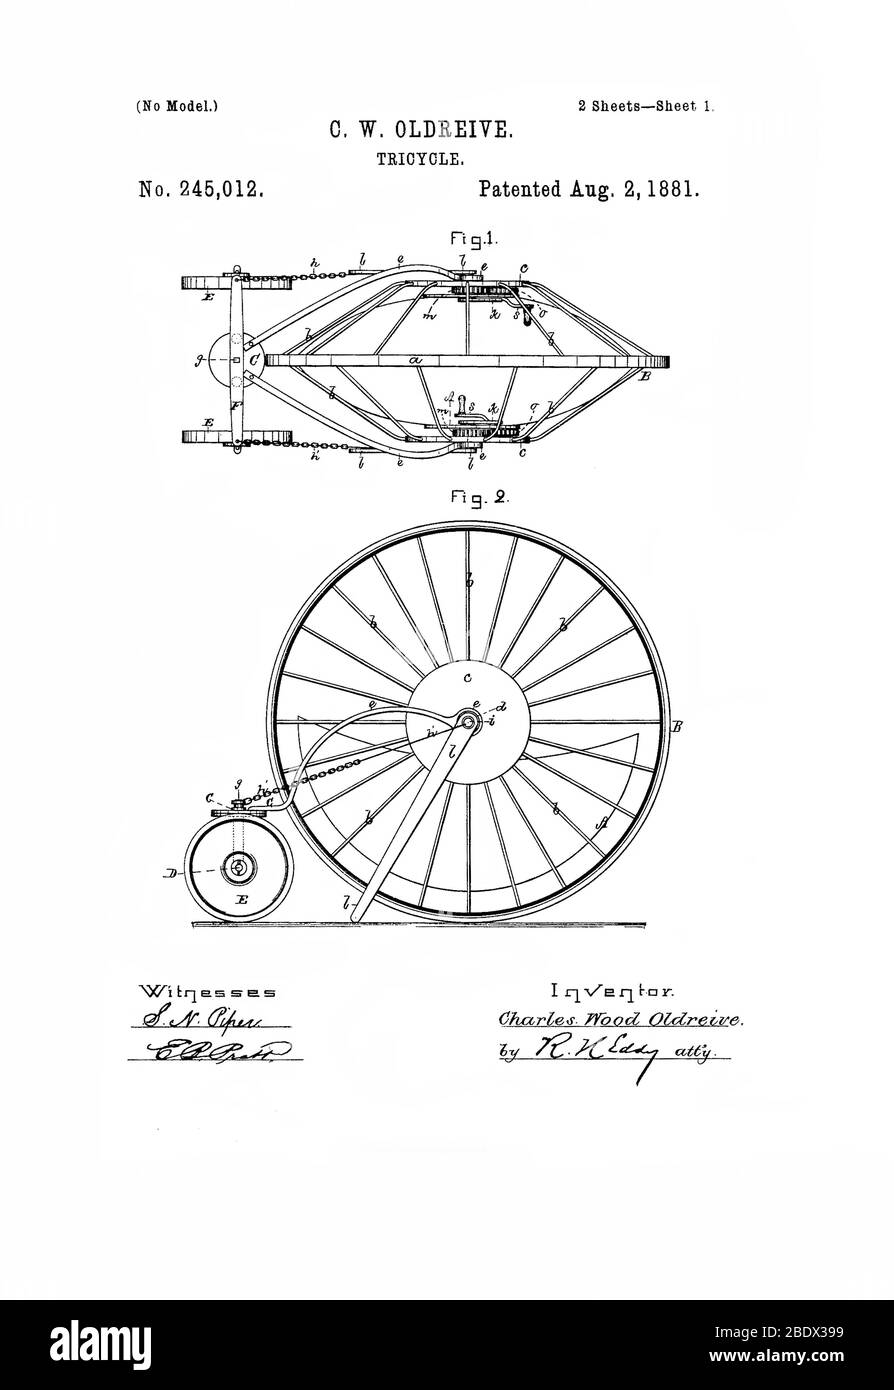 Oldreive Patent for Tricycle, 1881 Stock Photo